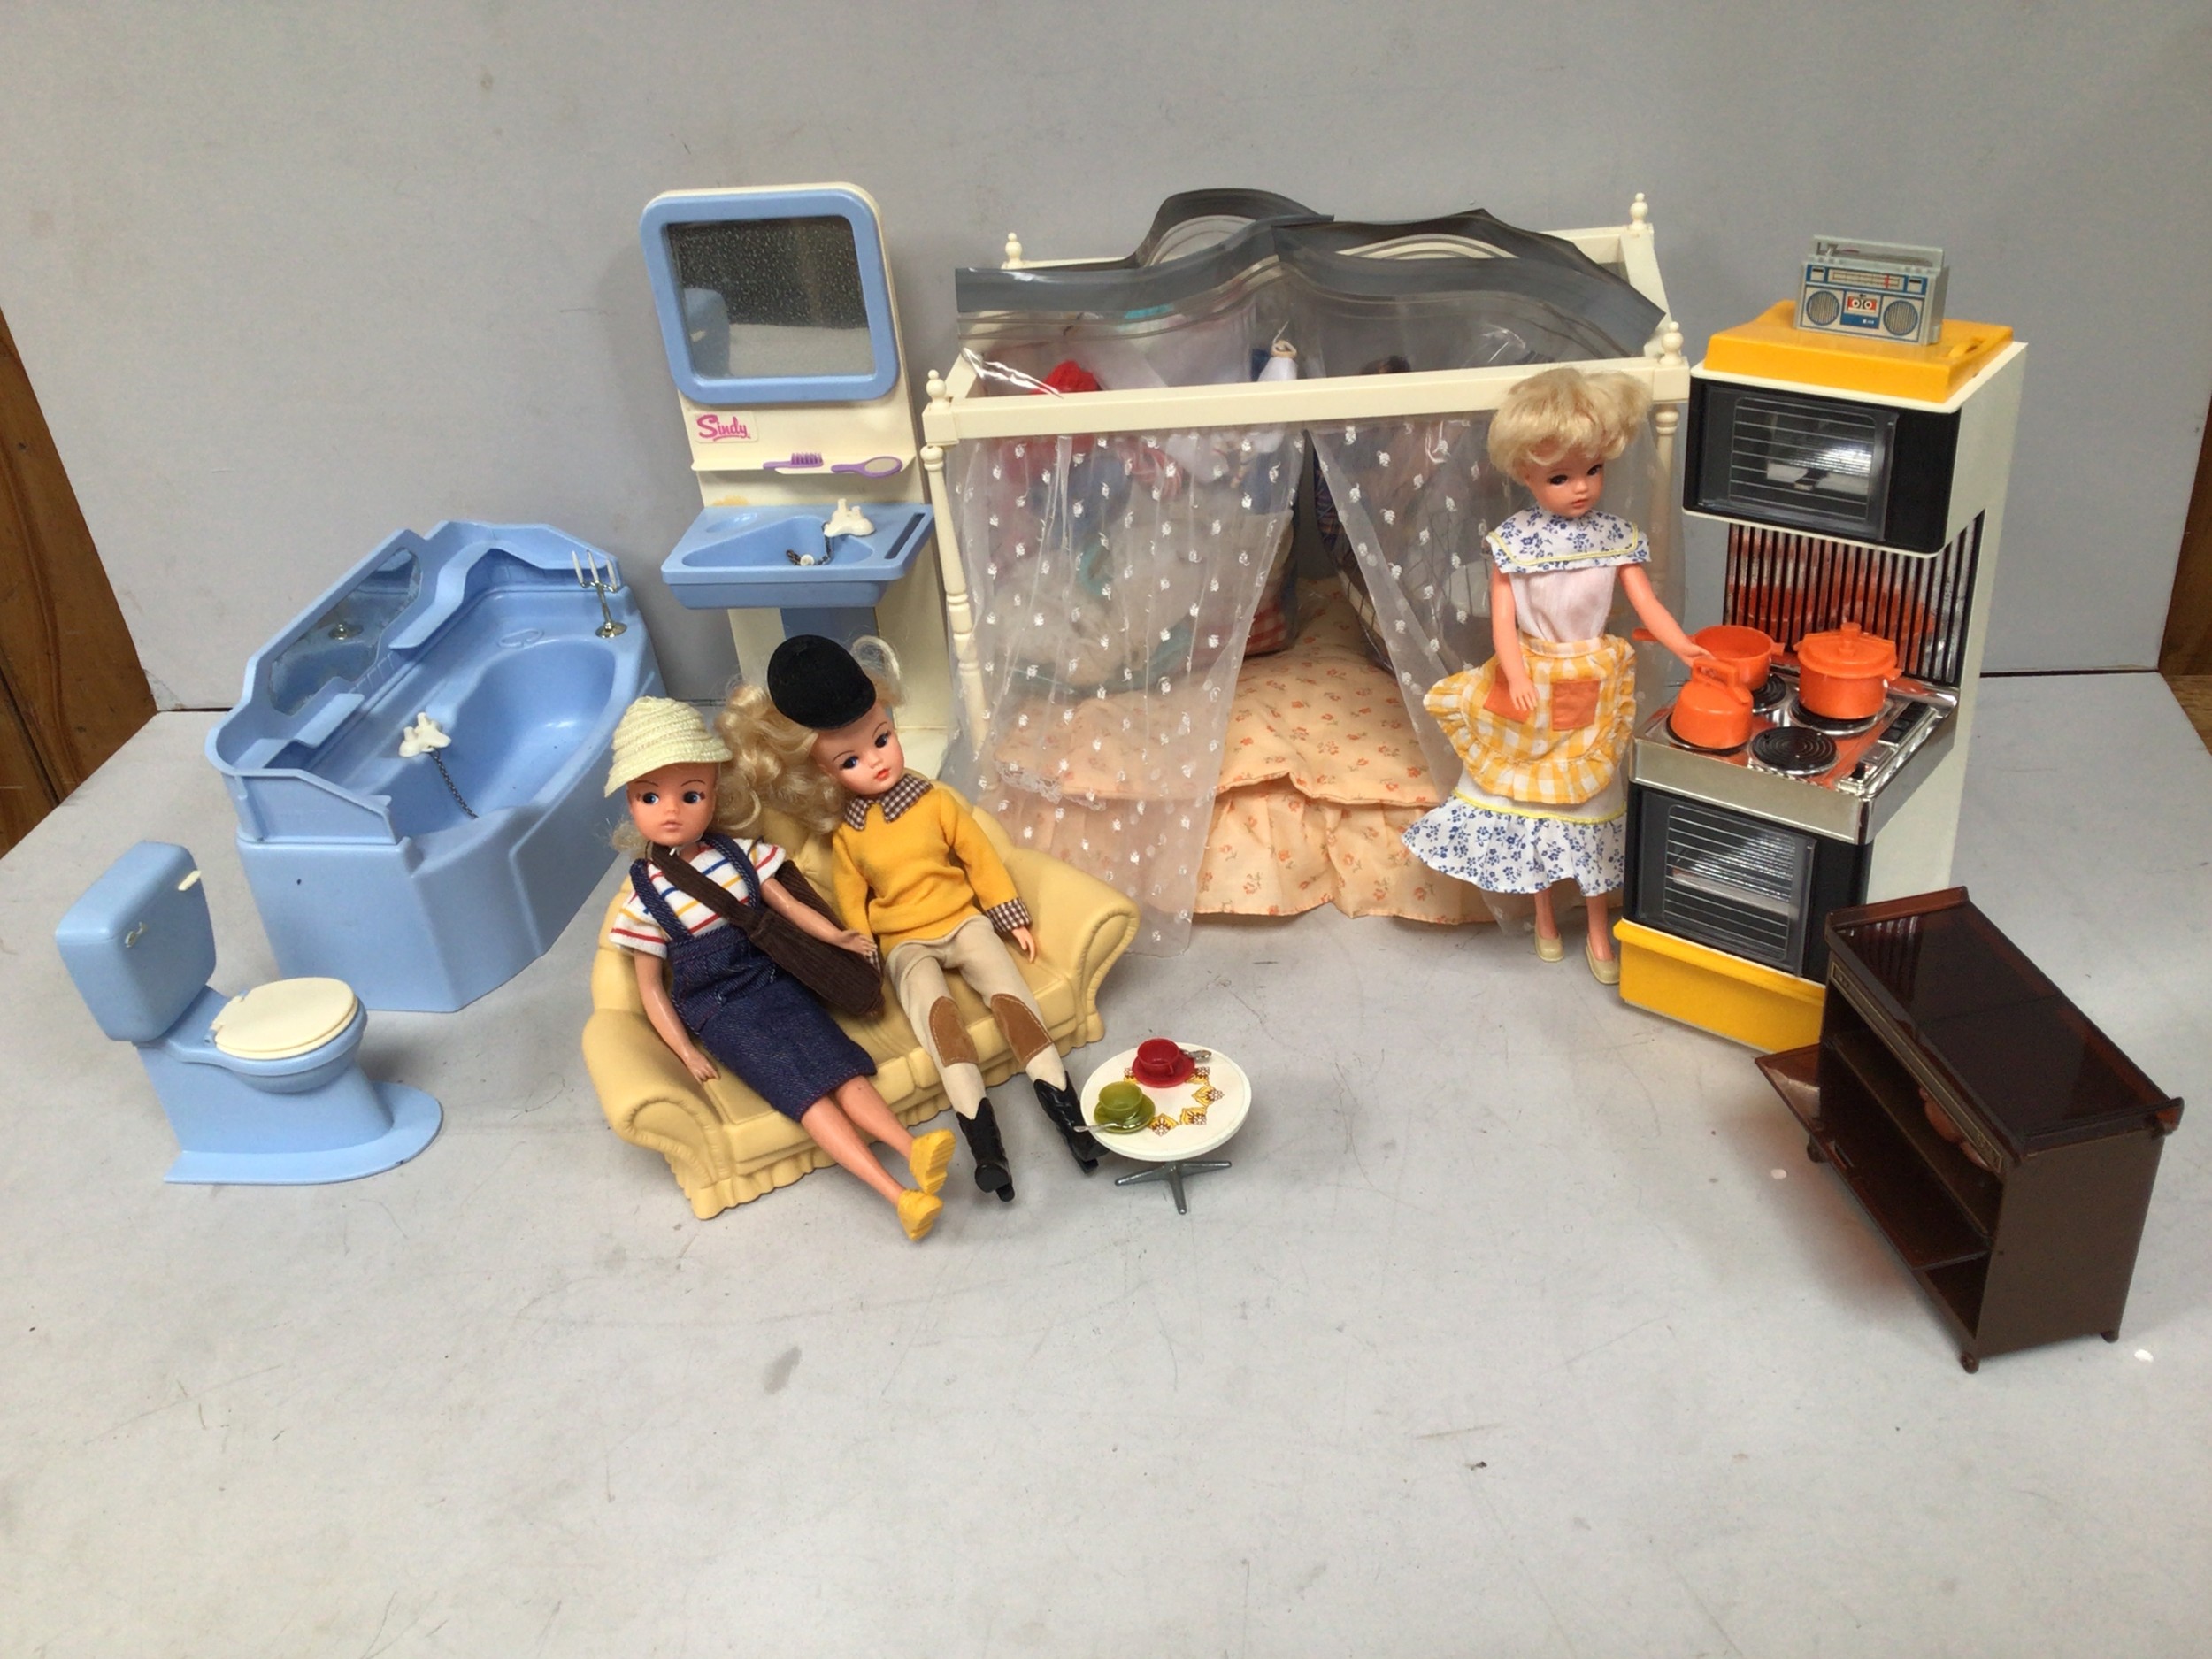 Three 1980s Sindy dolls with Sindy three-piece bathroom suite, four poster bed, cooker, hostess